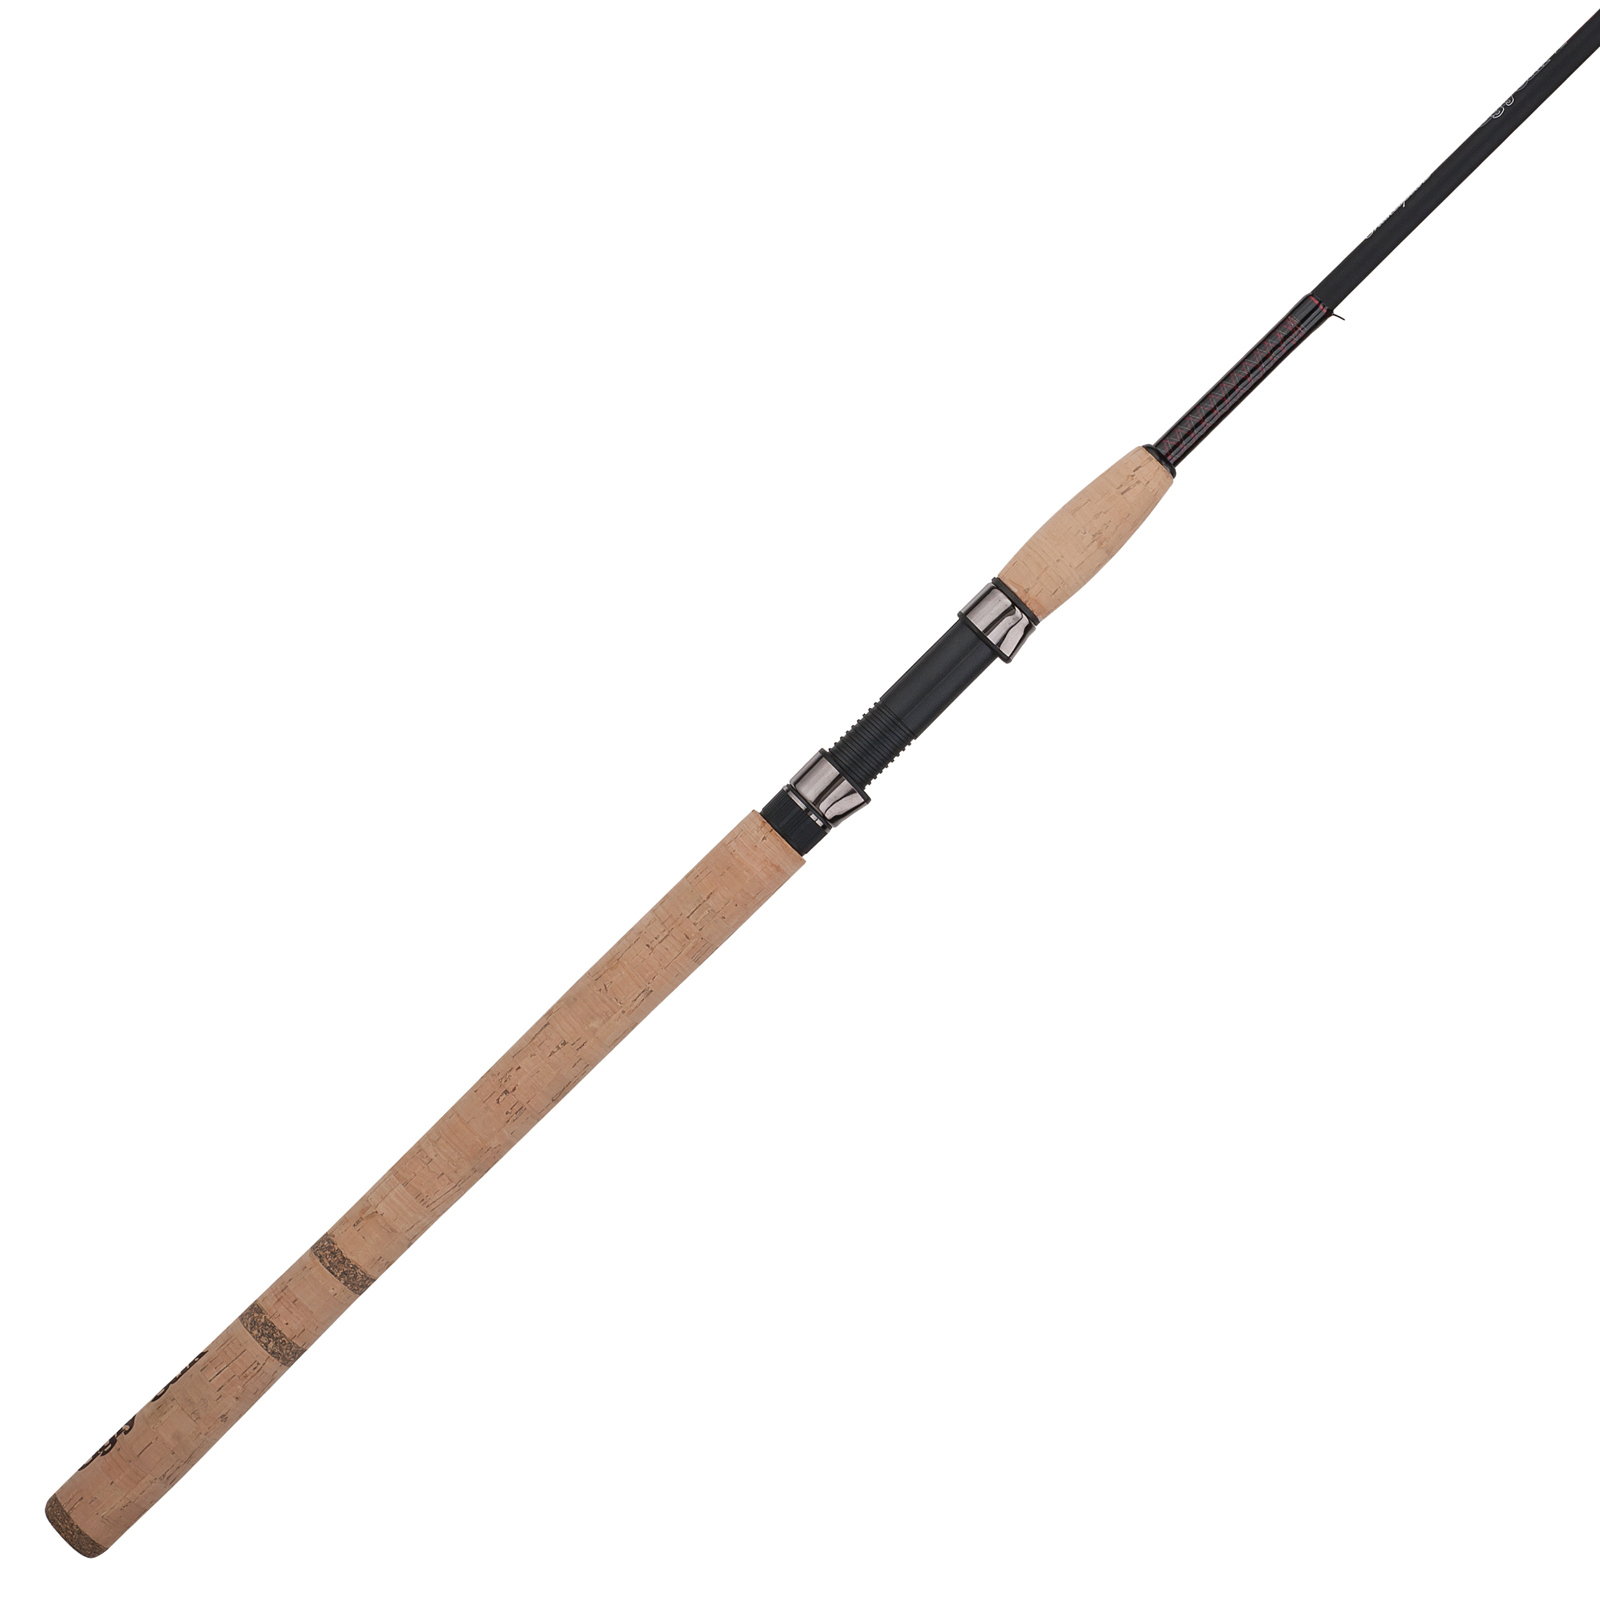 Ugly Stik Elite Spinning Rod, 2 Piece, Moderate/Fast, Extra Heavy 3/4-3oz  Lures, 14 lb, 50lb, 8 Guides USESSP902XH , $4.04 Off with Free S&H —  CampSaver